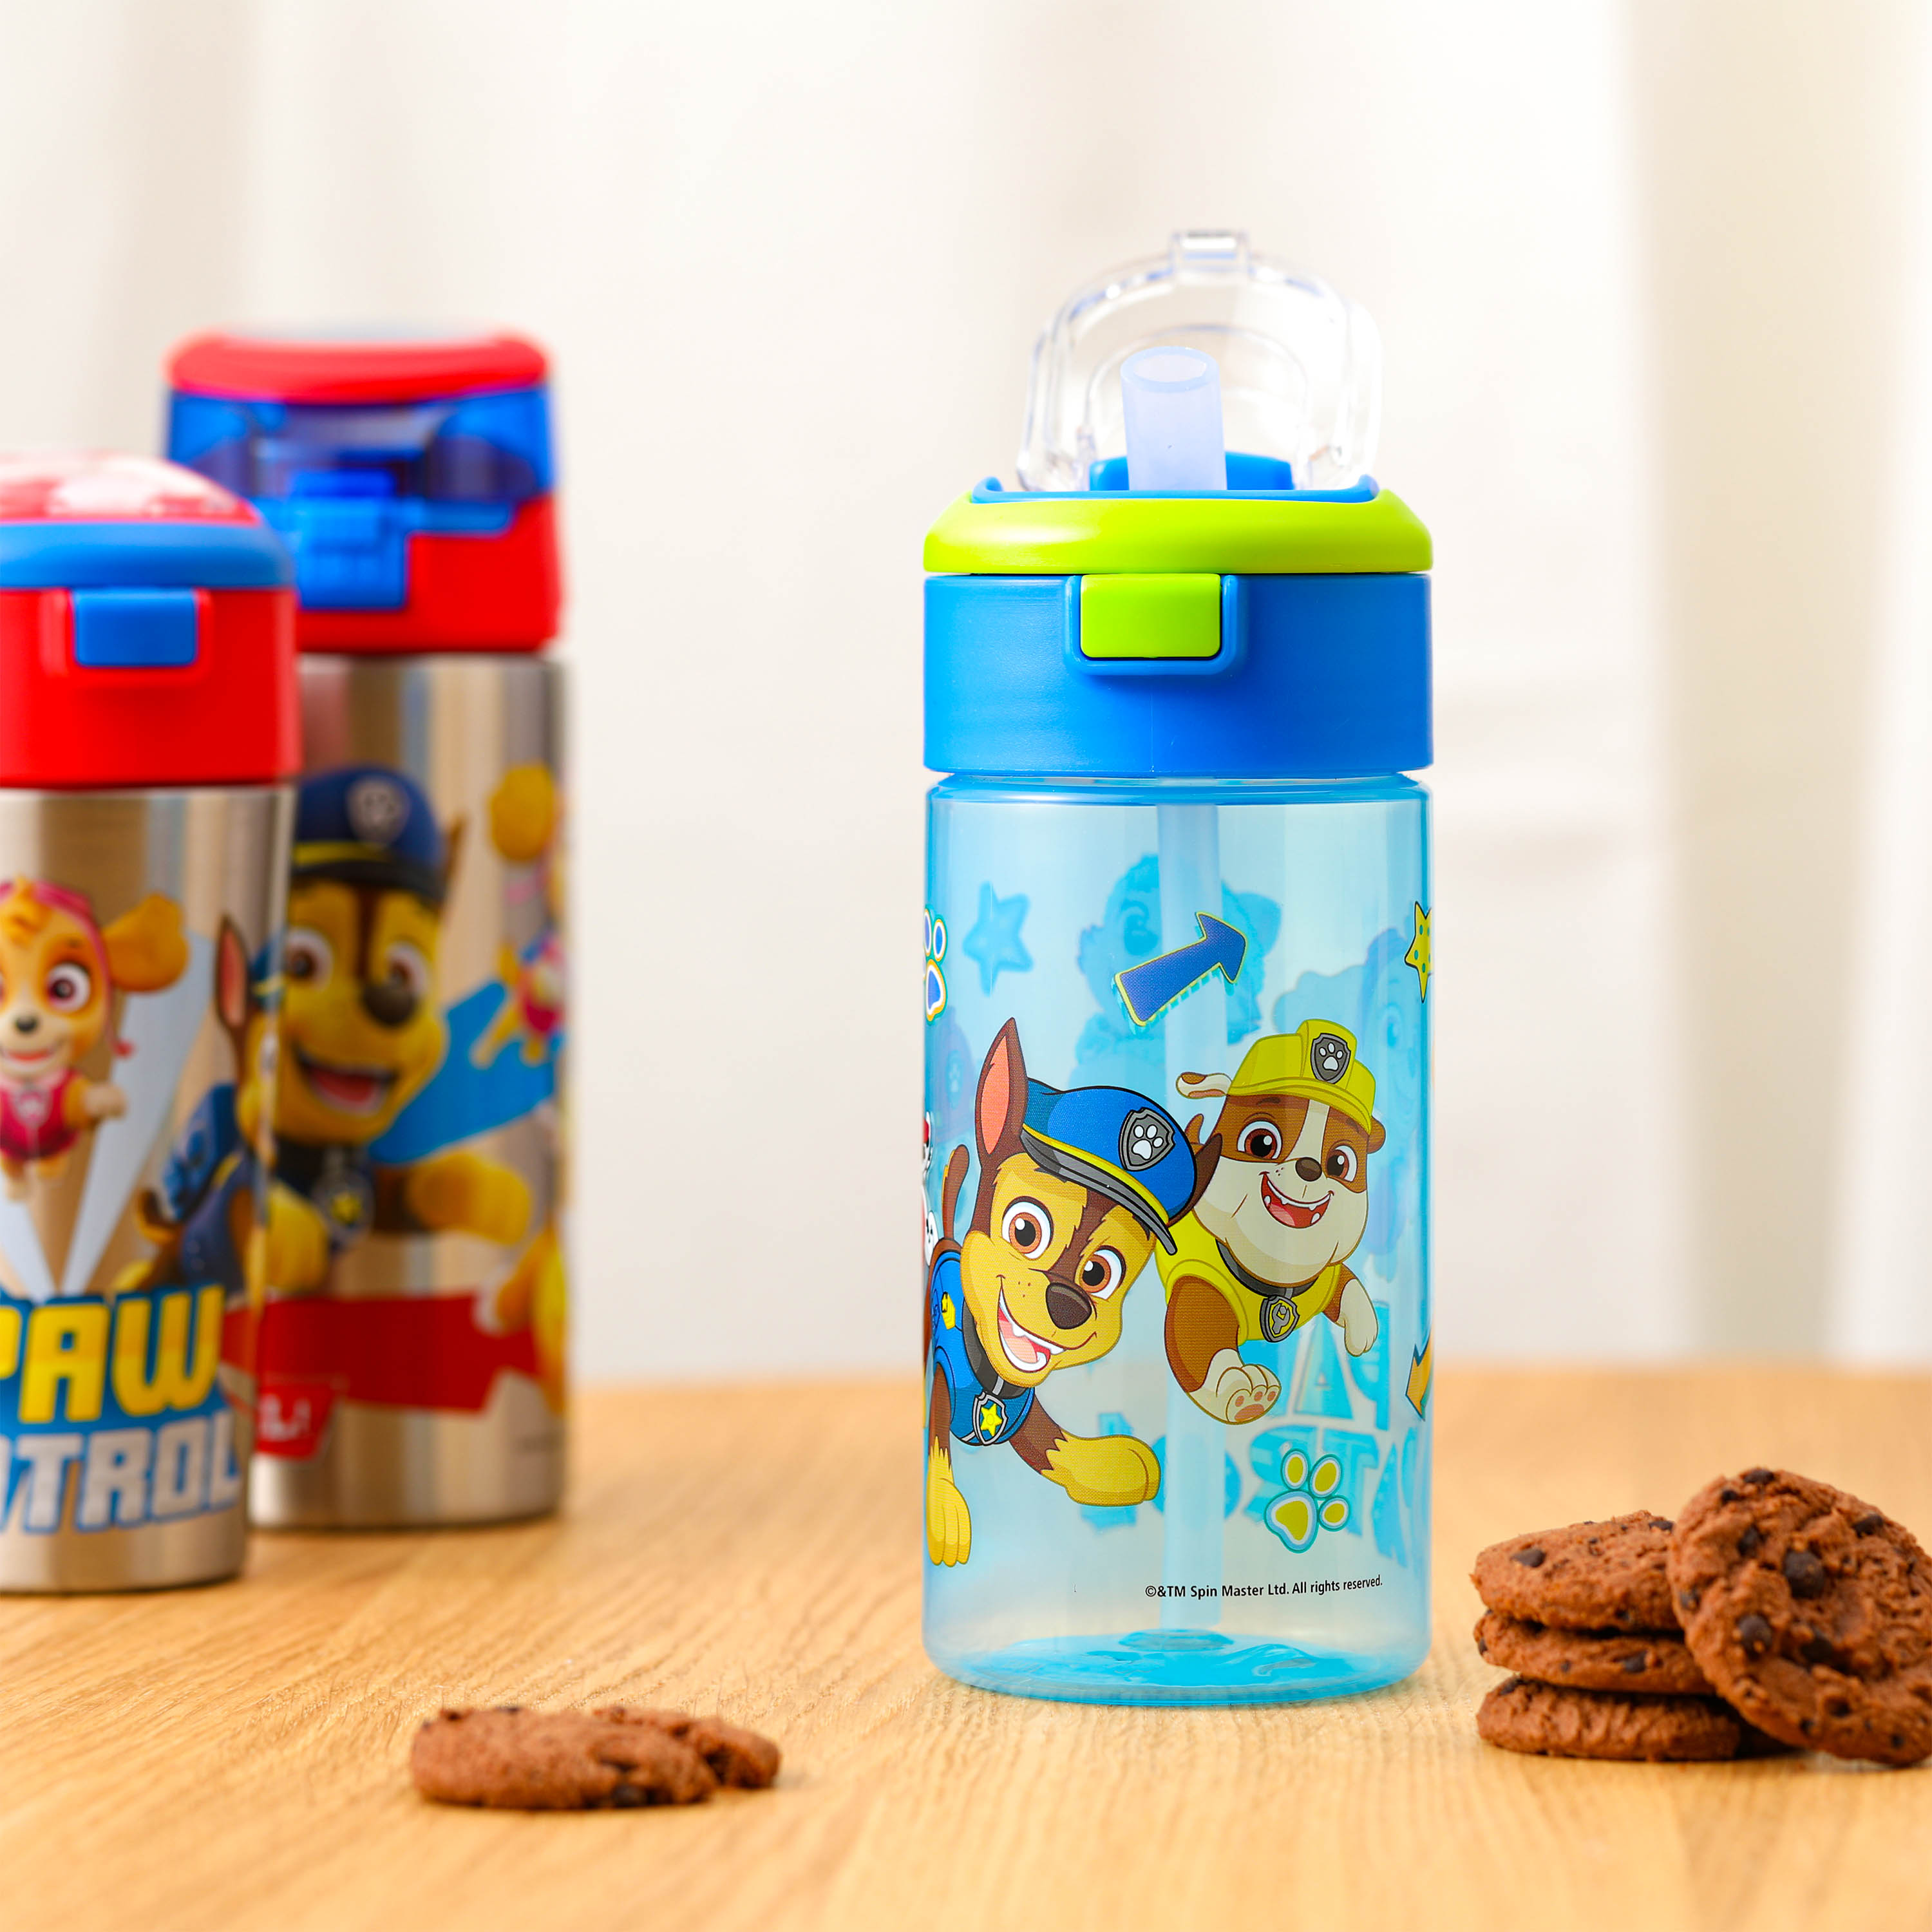 Paw Patrol 18 ounce Reusable Plastic Water Bottle with Push-button lid, Chase, Marshall & Rubble slideshow image 2